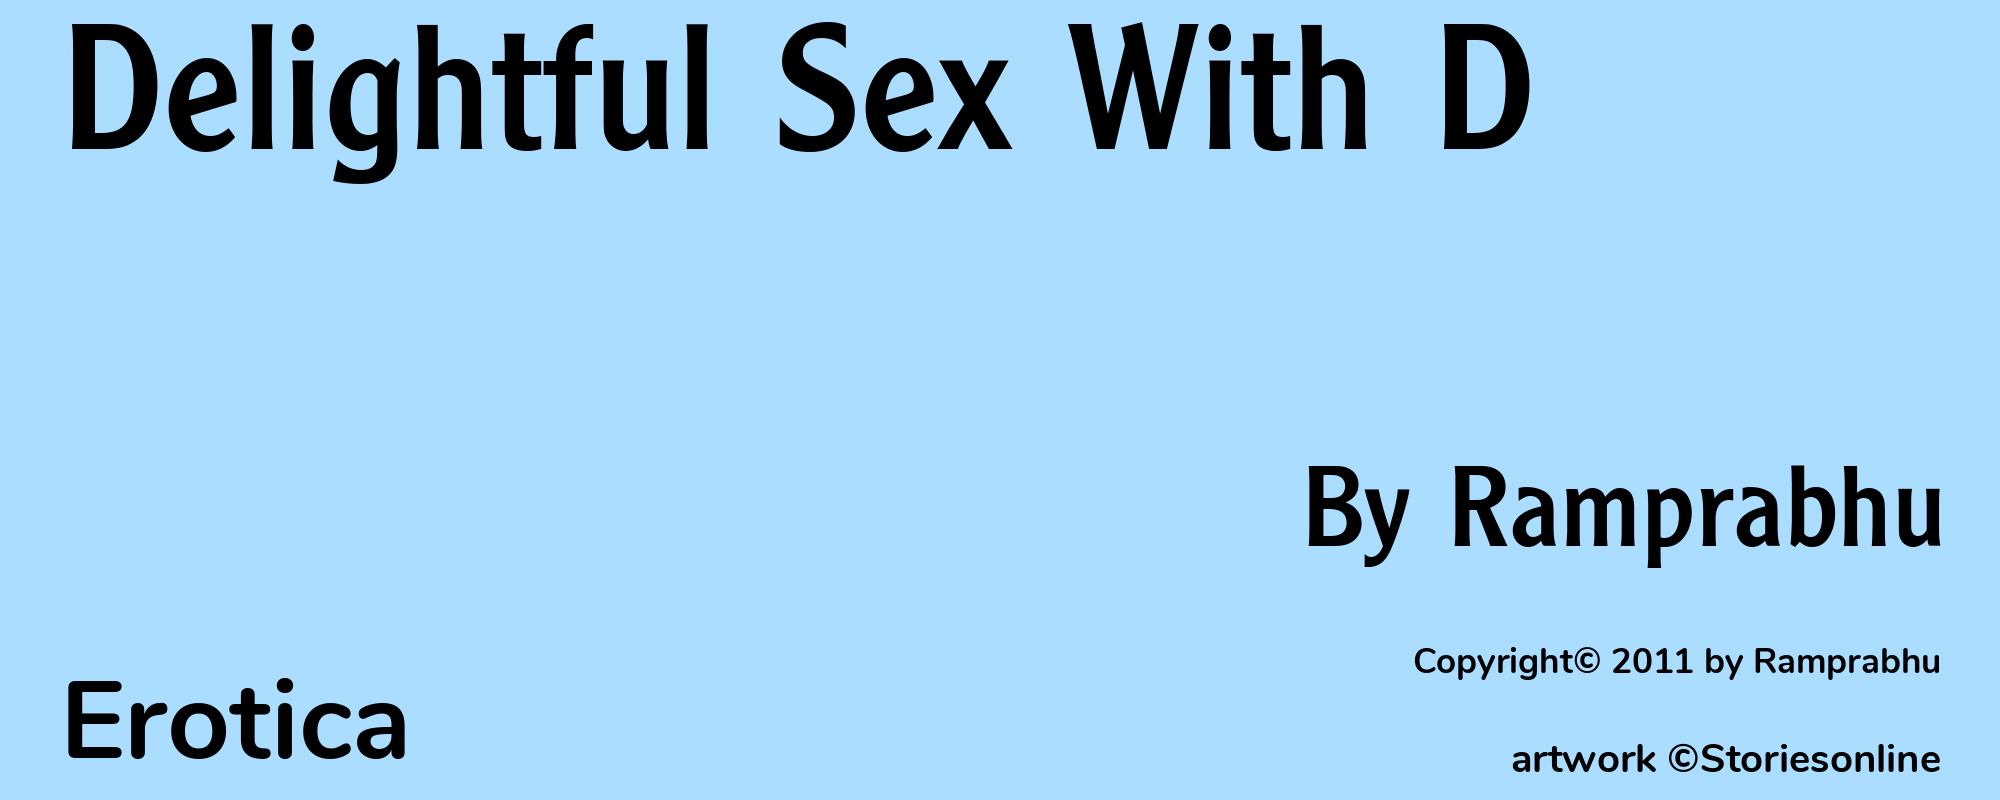 Delightful Sex With D - Cover